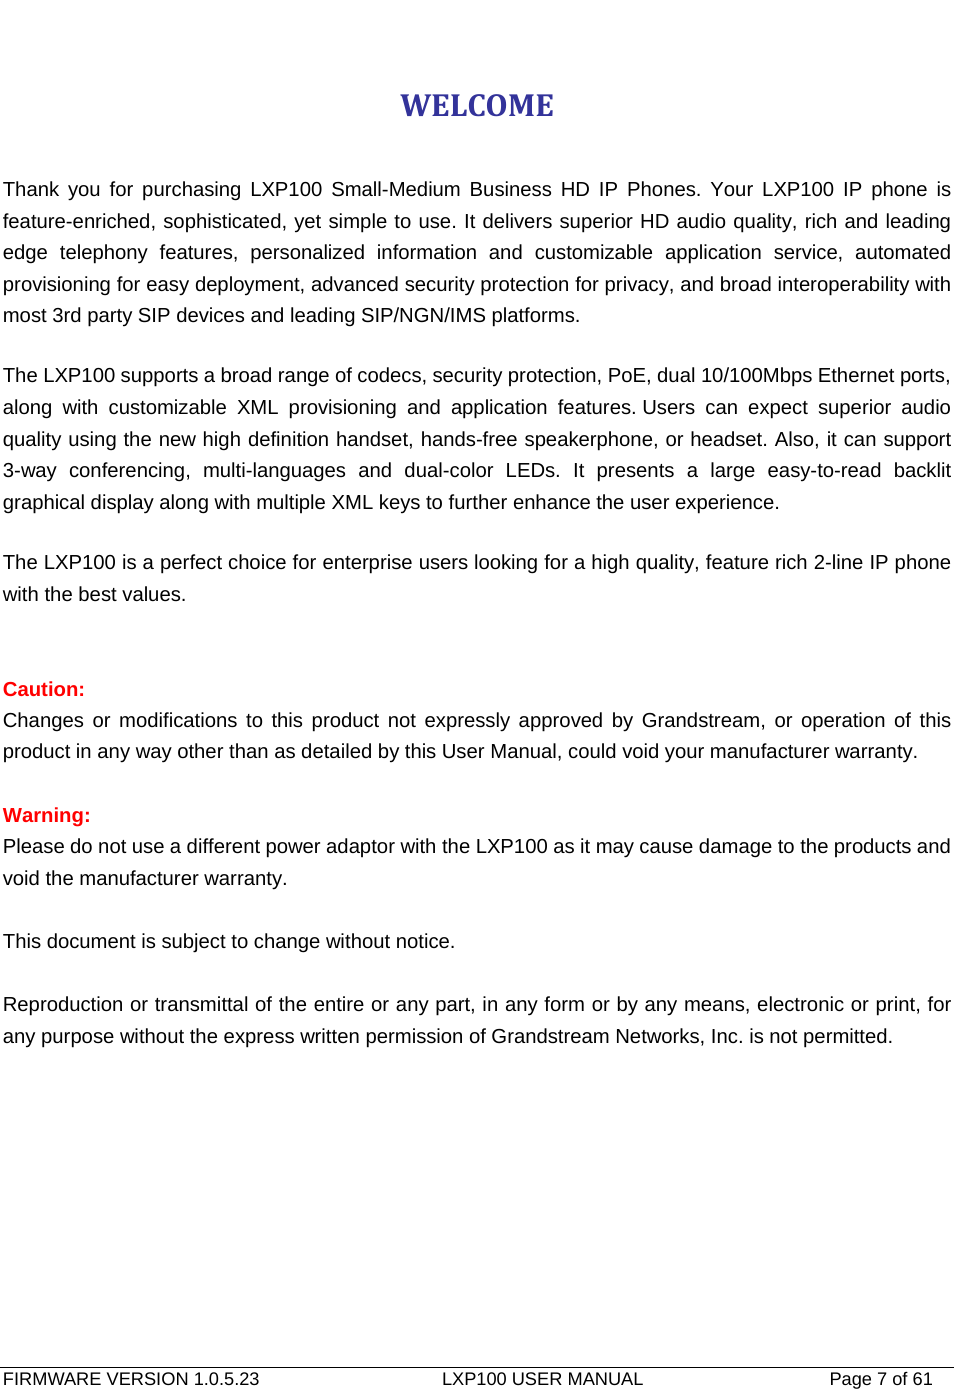   FIRMWARE VERSION 1.0.5.23                    LXP100 USER MANUAL                  Page 7 of 61                                   WELCOME Thank you for purchasing LXP100 Small-Medium Business HD IP Phones. Your LXP100 IP phone is feature-enriched, sophisticated, yet simple to use. It delivers superior HD audio quality, rich and leading edge telephony features, personalized information and customizable application service, automated provisioning for easy deployment, advanced security protection for privacy, and broad interoperability with most 3rd party SIP devices and leading SIP/NGN/IMS platforms.   The LXP100 supports a broad range of codecs, security protection, PoE, dual 10/100Mbps Ethernet ports, along with customizable XML provisioning and application features. Users can expect superior audio quality using the new high definition handset, hands-free speakerphone, or headset. Also, it can support 3-way conferencing, multi-languages and dual-color LEDs. It presents a large easy-to-read backlit graphical display along with multiple XML keys to further enhance the user experience.   The LXP100 is a perfect choice for enterprise users looking for a high quality, feature rich 2-line IP phone with the best values.     Caution:  Changes or modifications to this product not expressly approved by Grandstream, or operation of this product in any way other than as detailed by this User Manual, could void your manufacturer warranty.  Warning:  Please do not use a different power adaptor with the LXP100 as it may cause damage to the products and void the manufacturer warranty.  This document is subject to change without notice.  Reproduction or transmittal of the entire or any part, in any form or by any means, electronic or print, for any purpose without the express written permission of Grandstream Networks, Inc. is not permitted. 